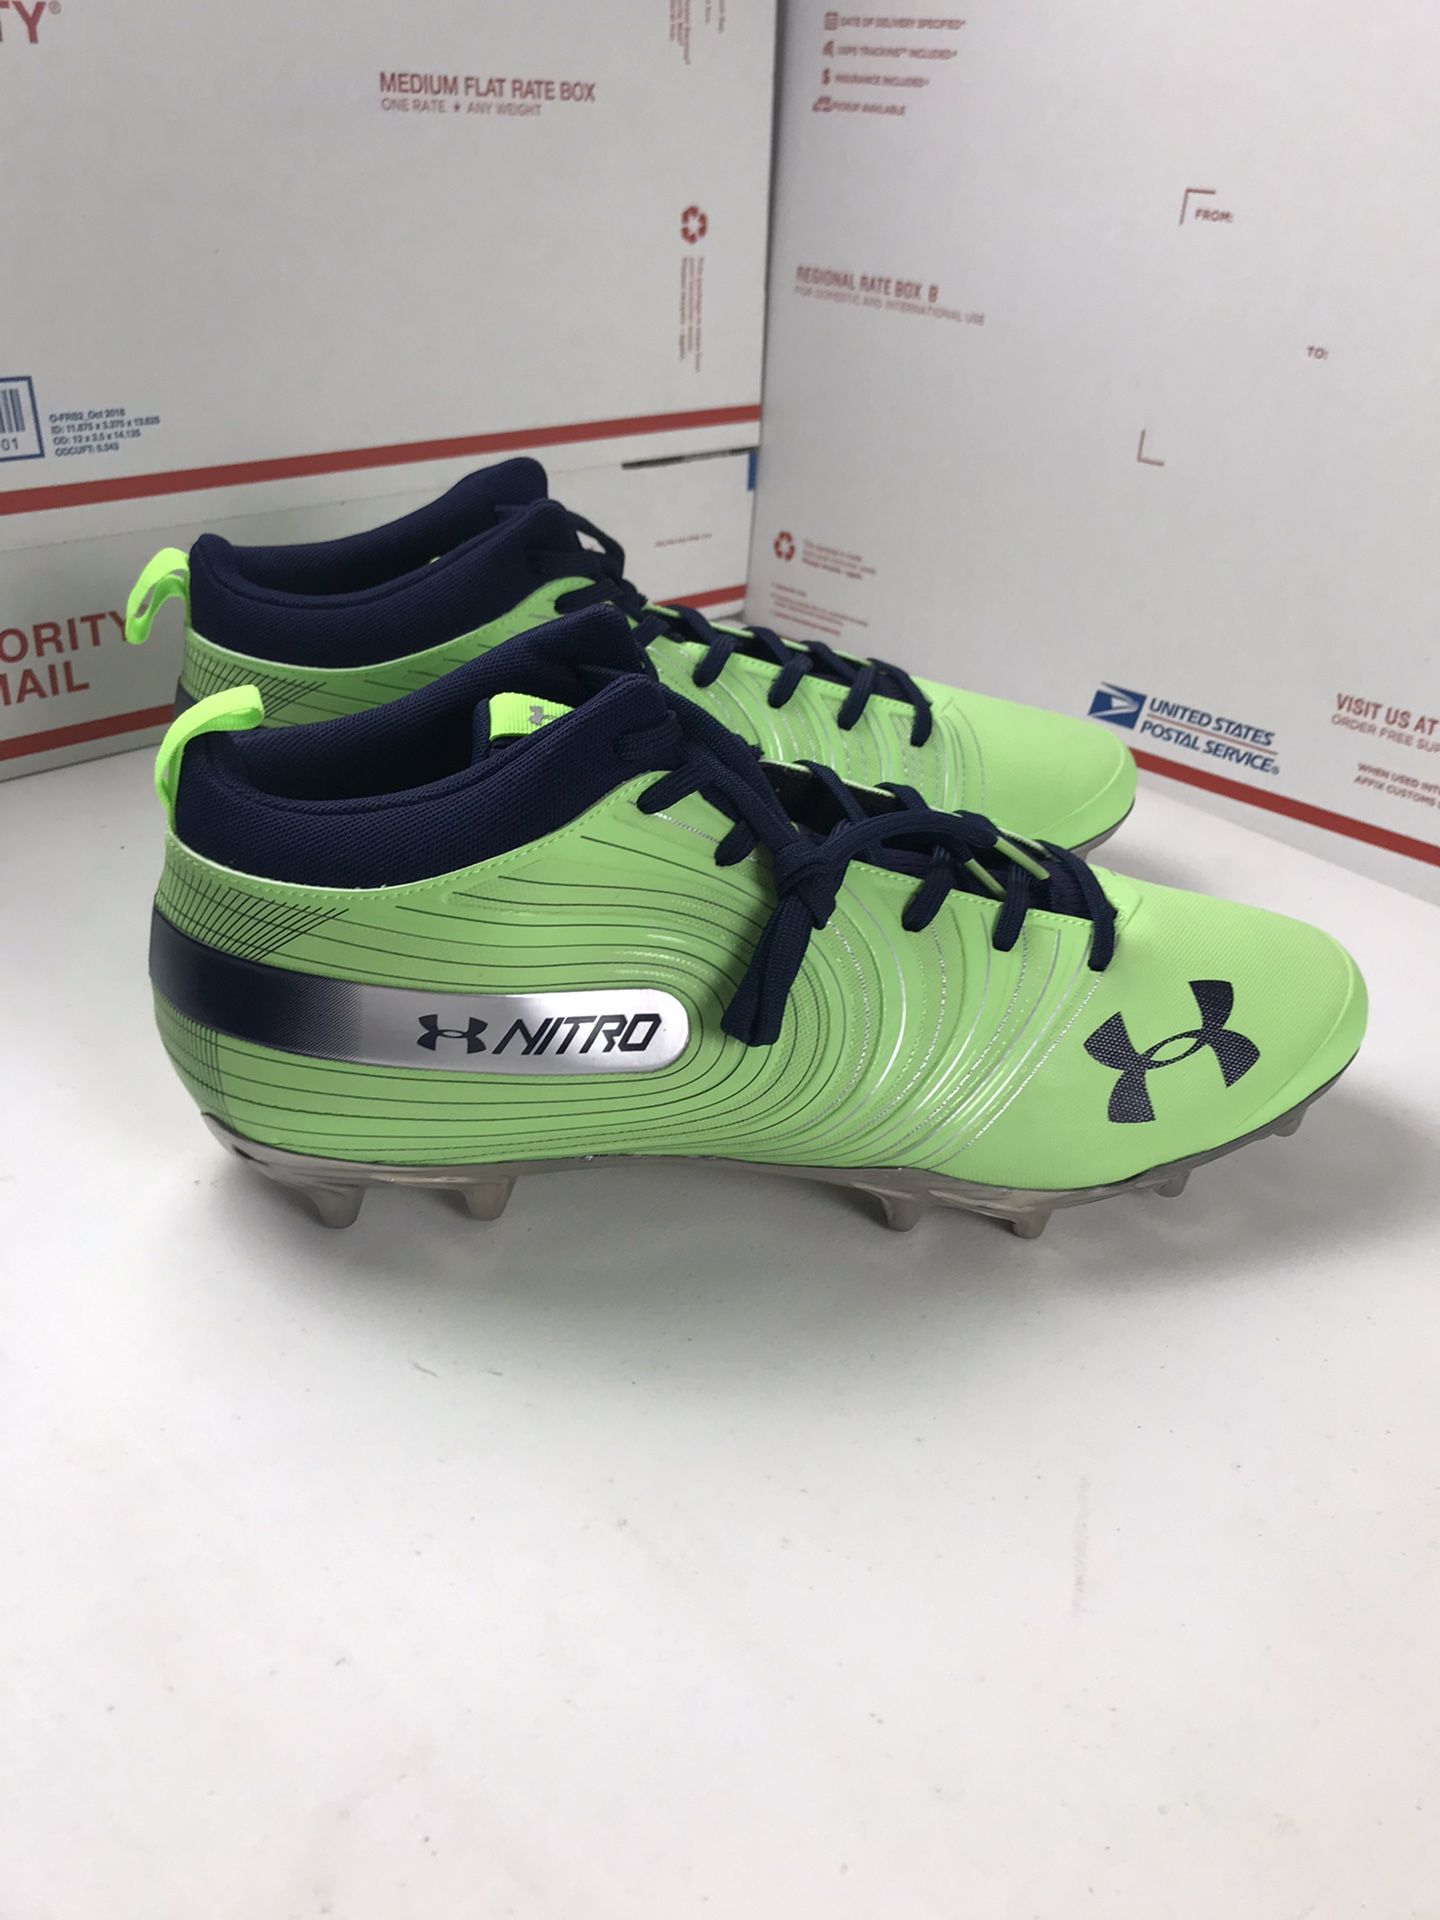 New No Box Under Armour Cleats Football Green Blue Seahawk Colors Size 16